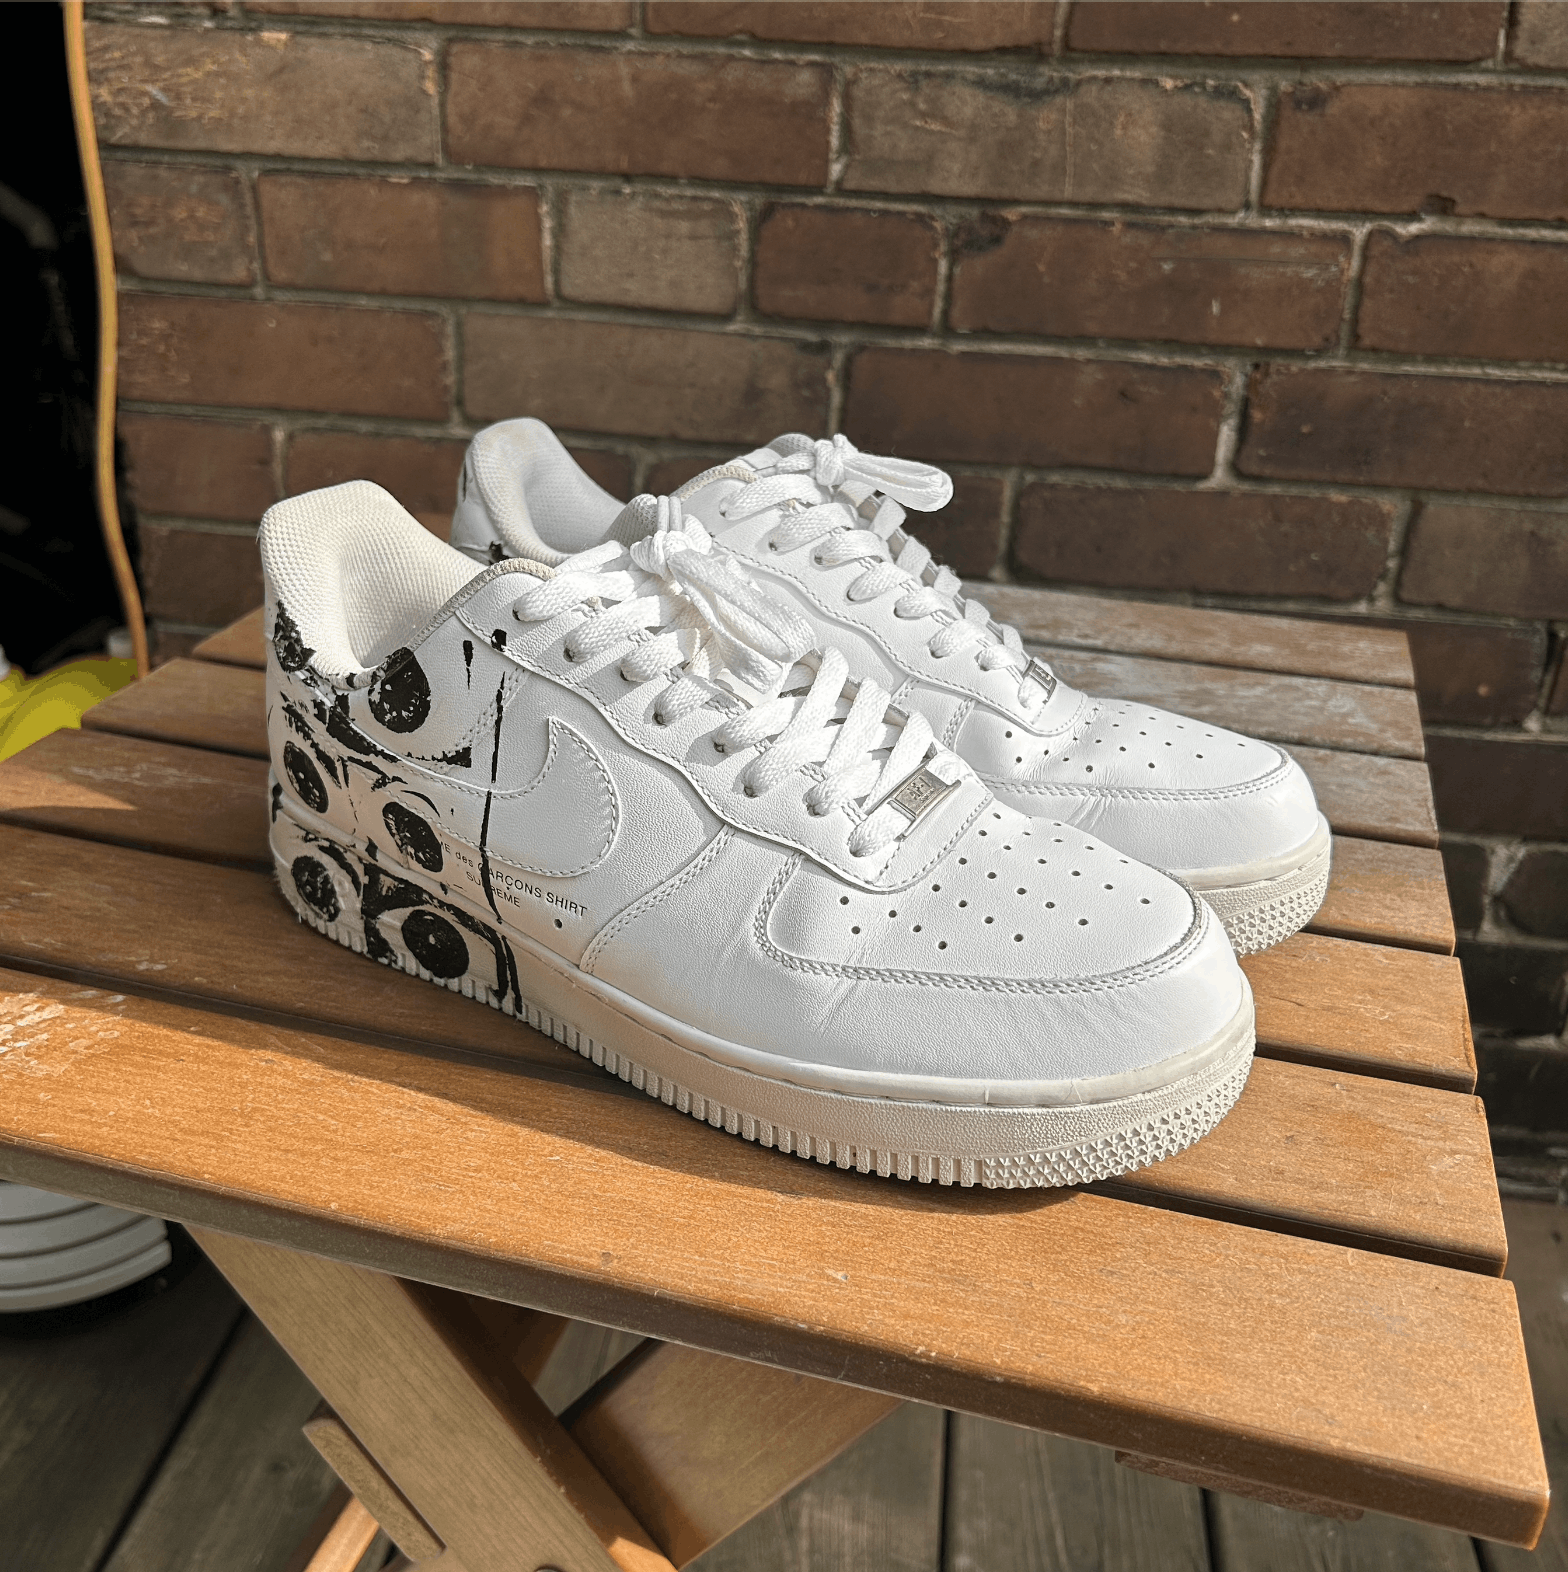 The Nike x Supreme x CDG Shirt Air Force 1 Is 2017's Most